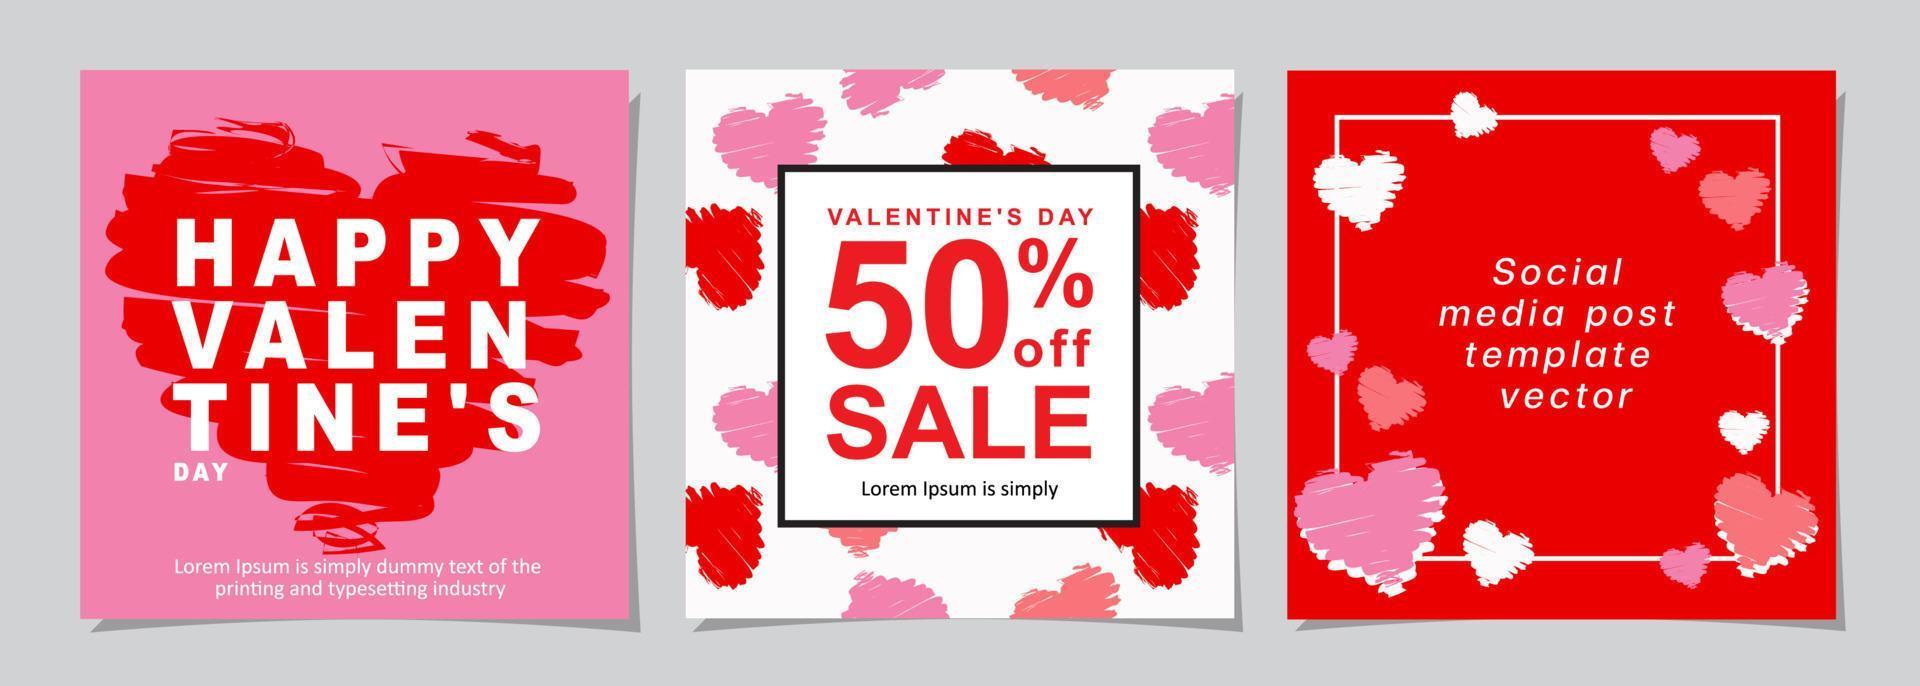 Happy Valentines Day square banner for social media posts, mobile apps, digital marketing, sales promotion and website ads. Vector backgrounds, geometric style with hearts pattern.